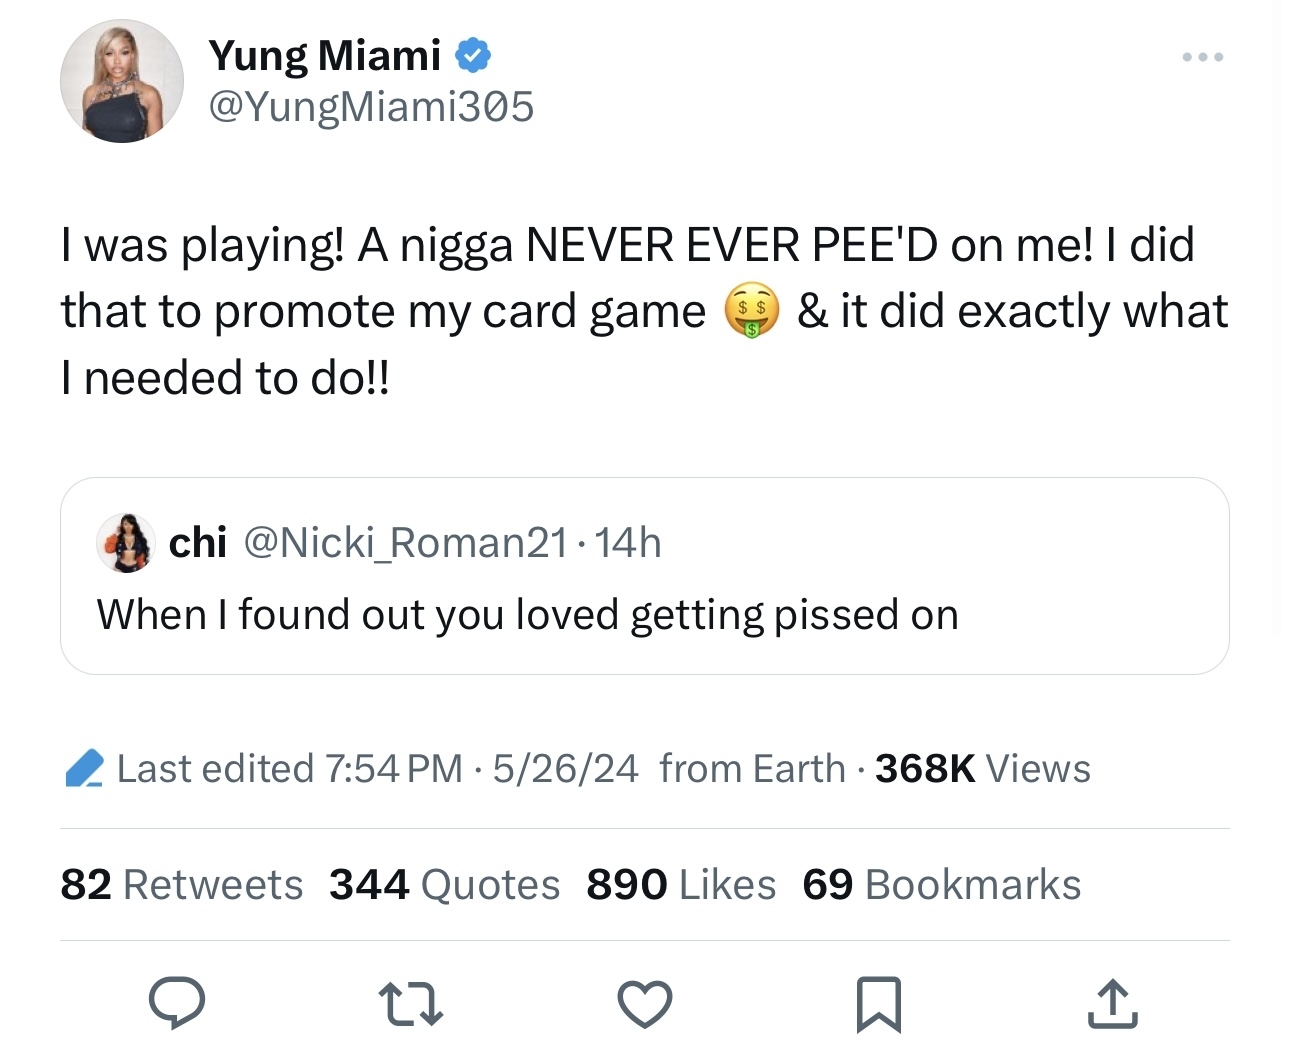 Tweet by Yung Miami denying a rumor and explaining the context of her previous statement, clarifying it was a joke to promote her card game. They respond to user @Nicki_Roman21